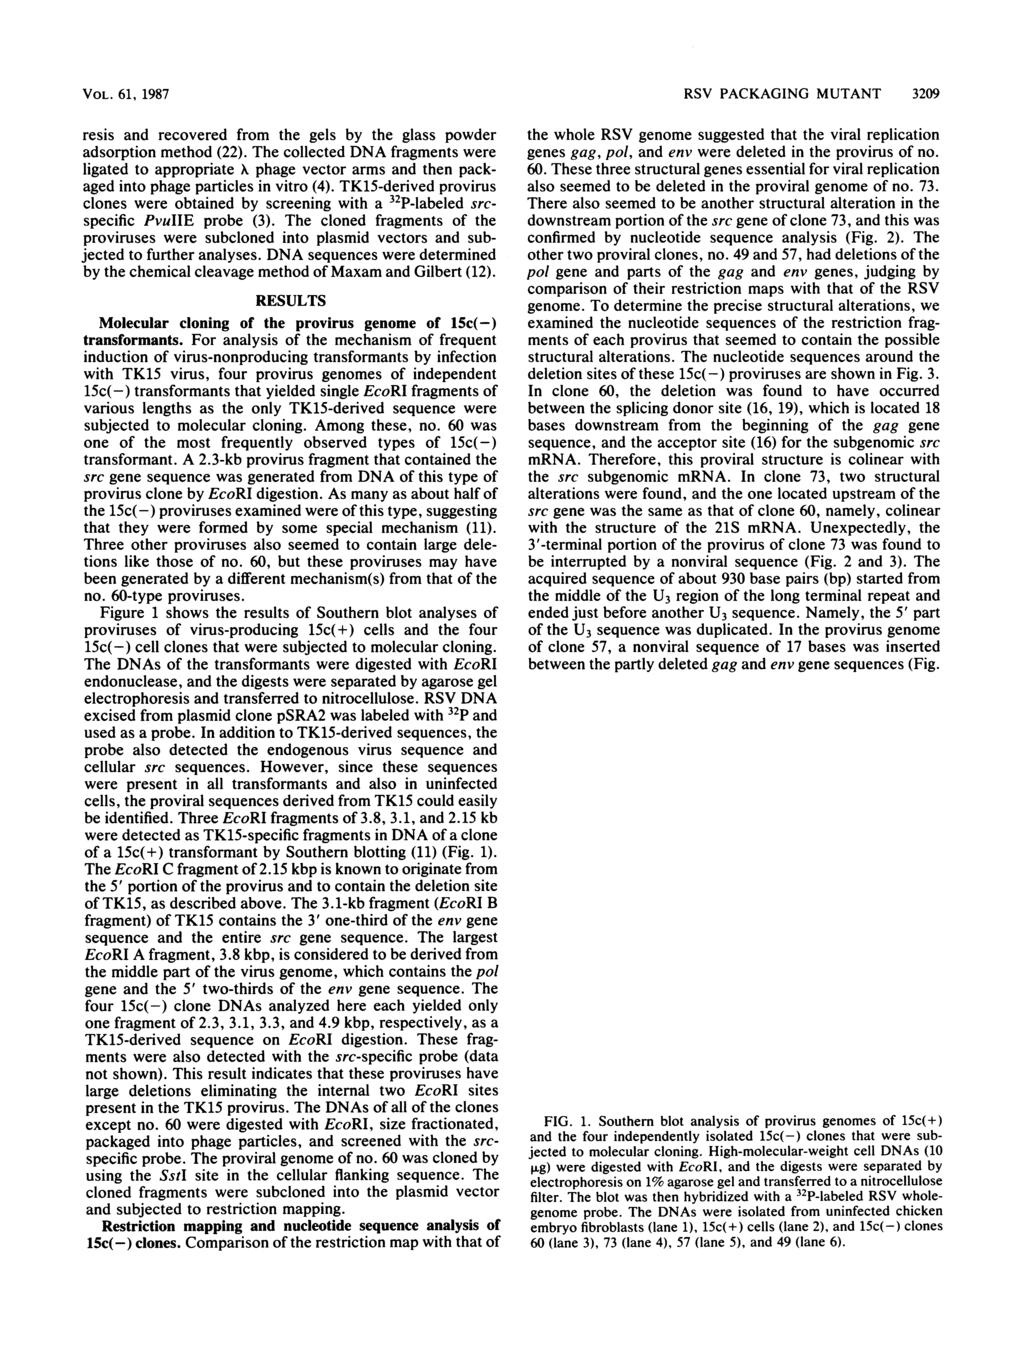 VOL. 61, 1987 resis and recovered from the gels by the glass powder adsorption method (22).